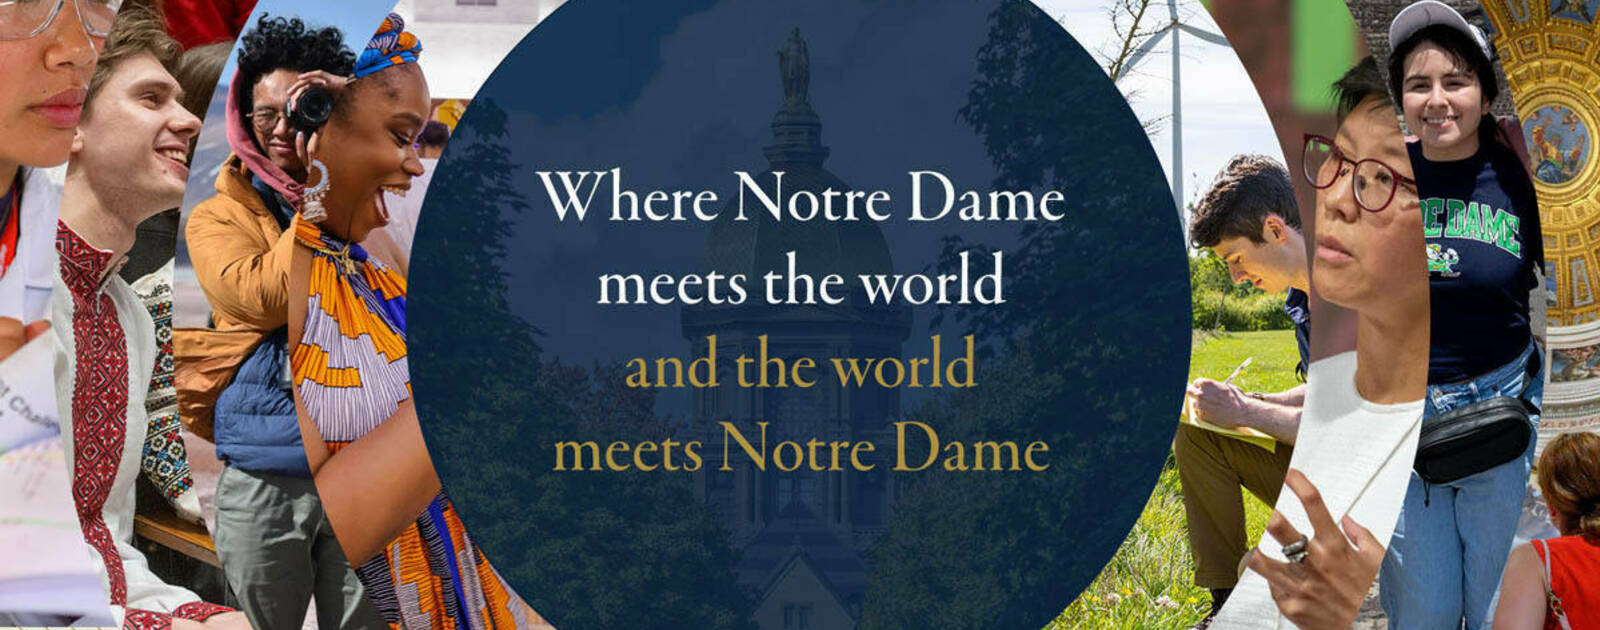 Notre Dame International expands global reach and presence with new name: Notre Dame Global |  News |  Notre Dame News